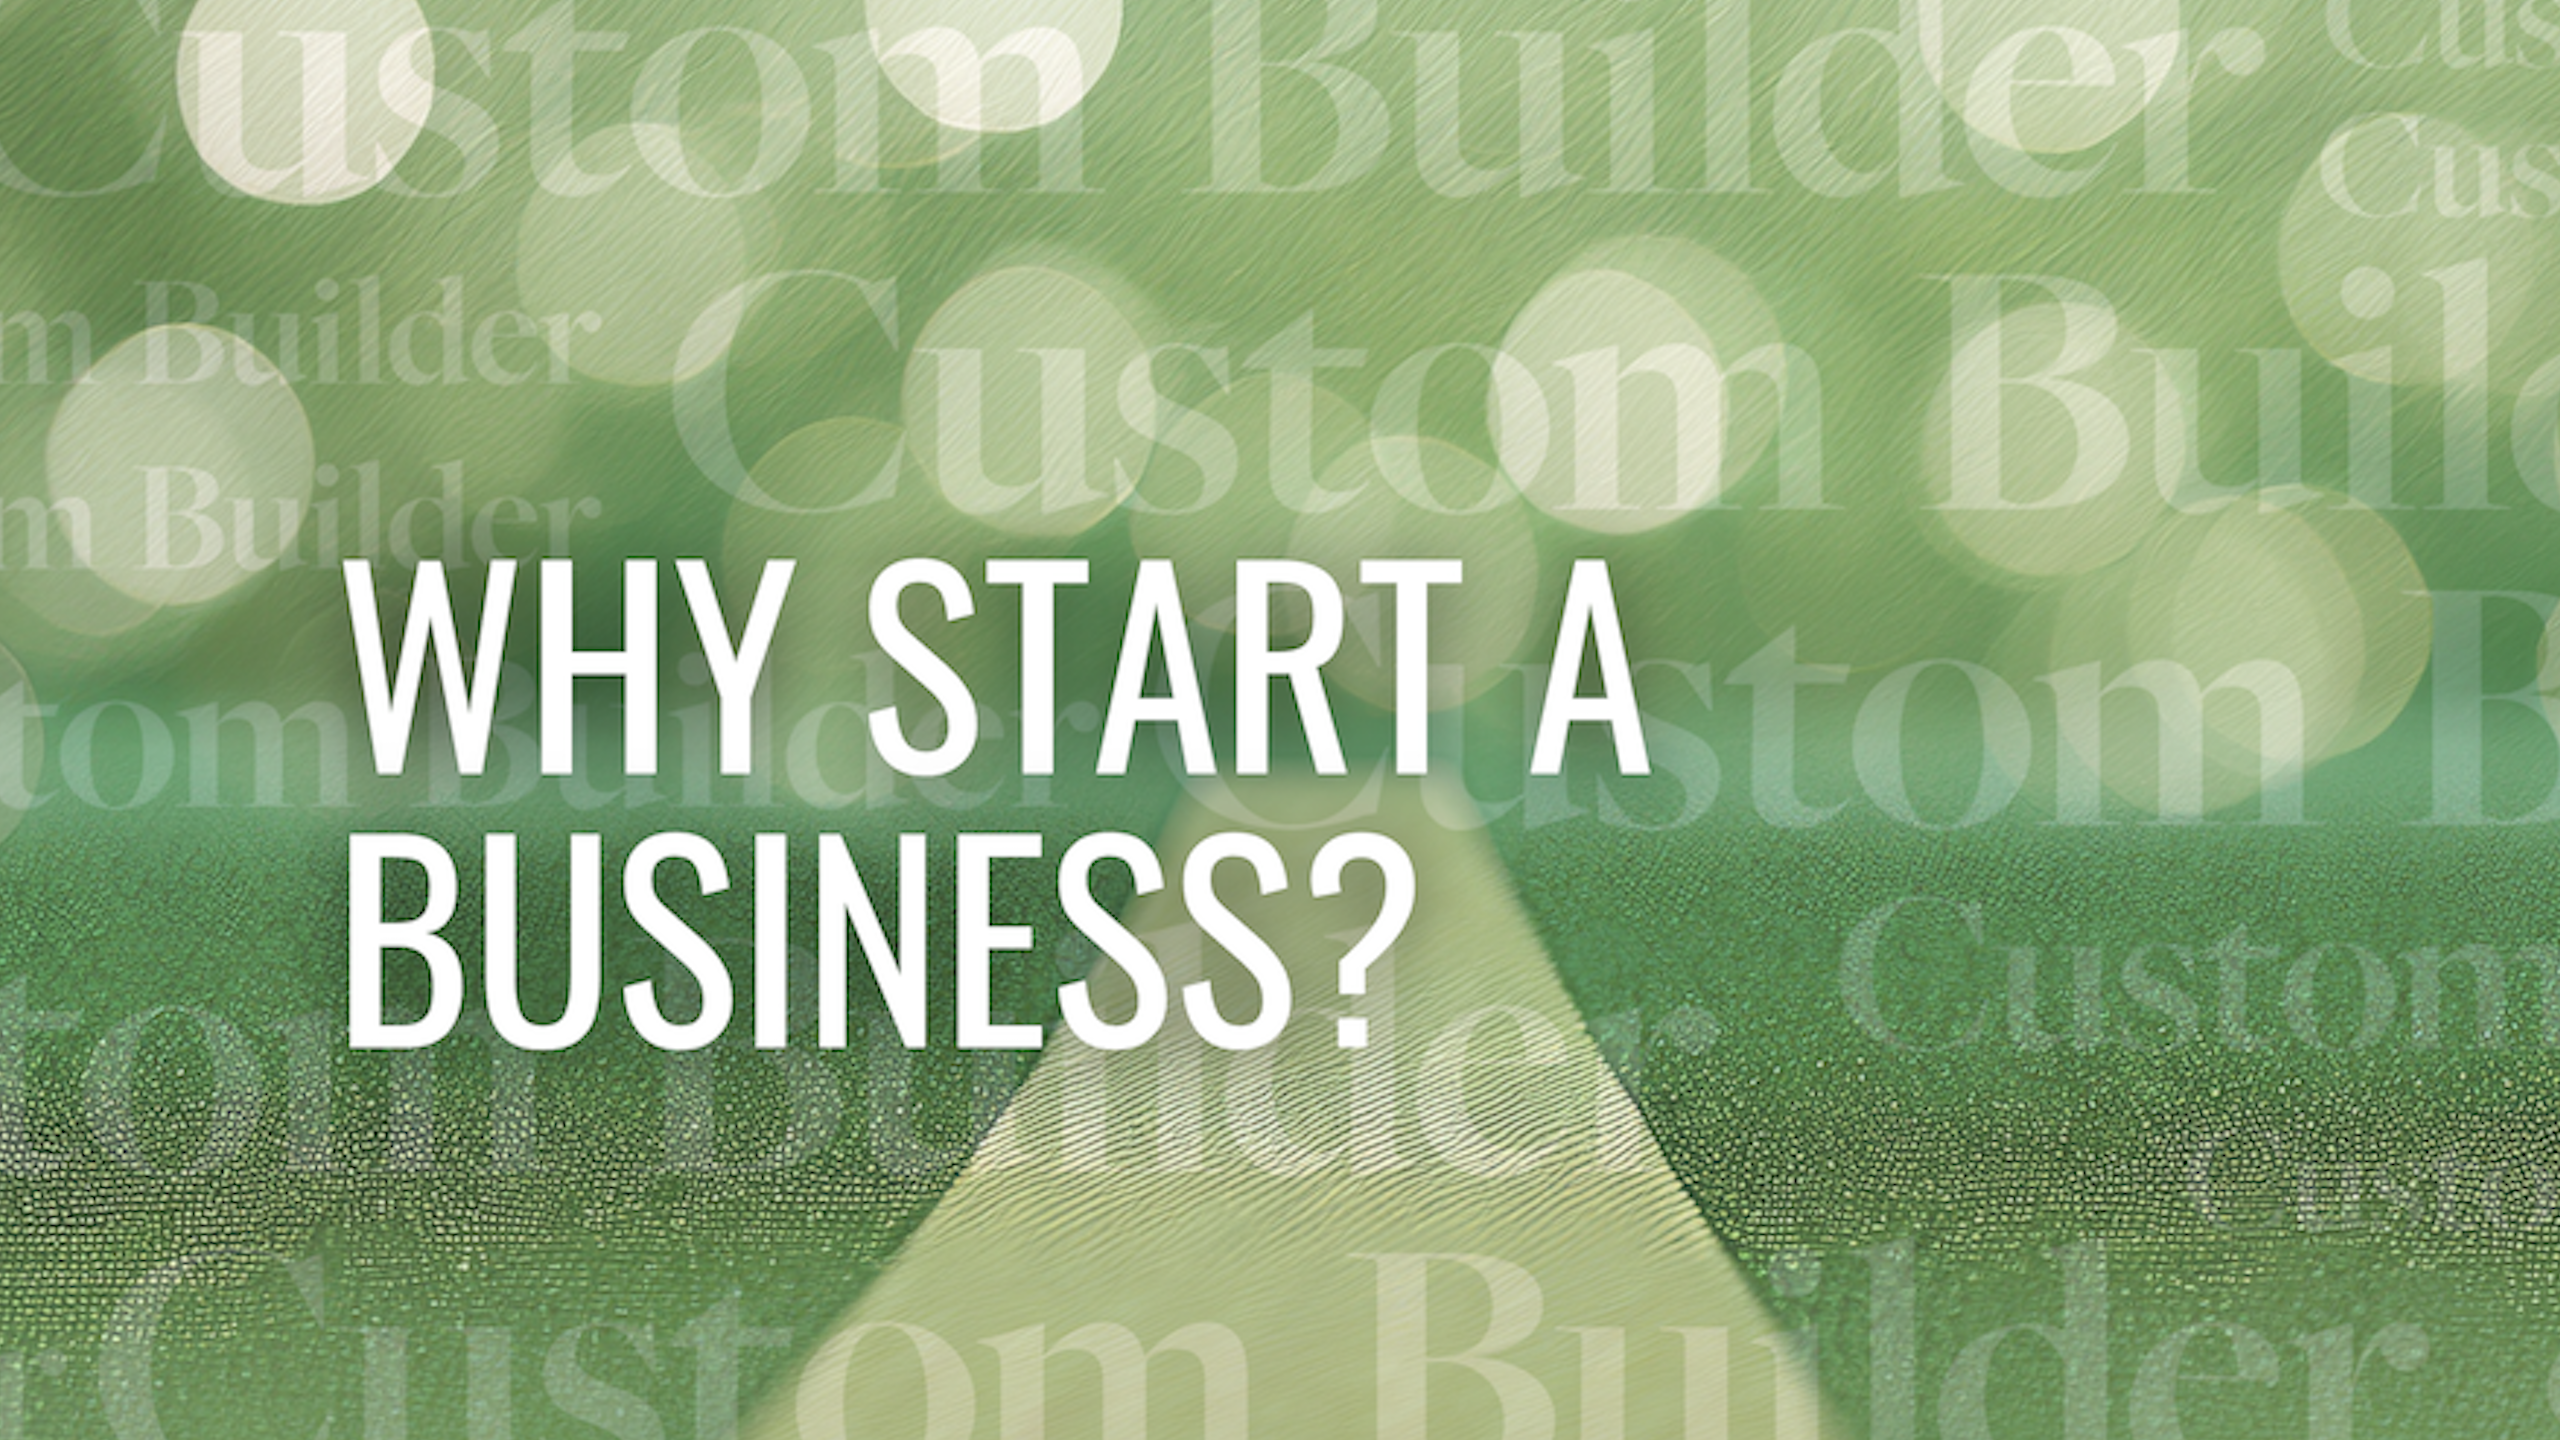 Why Start a Custom Building Business?